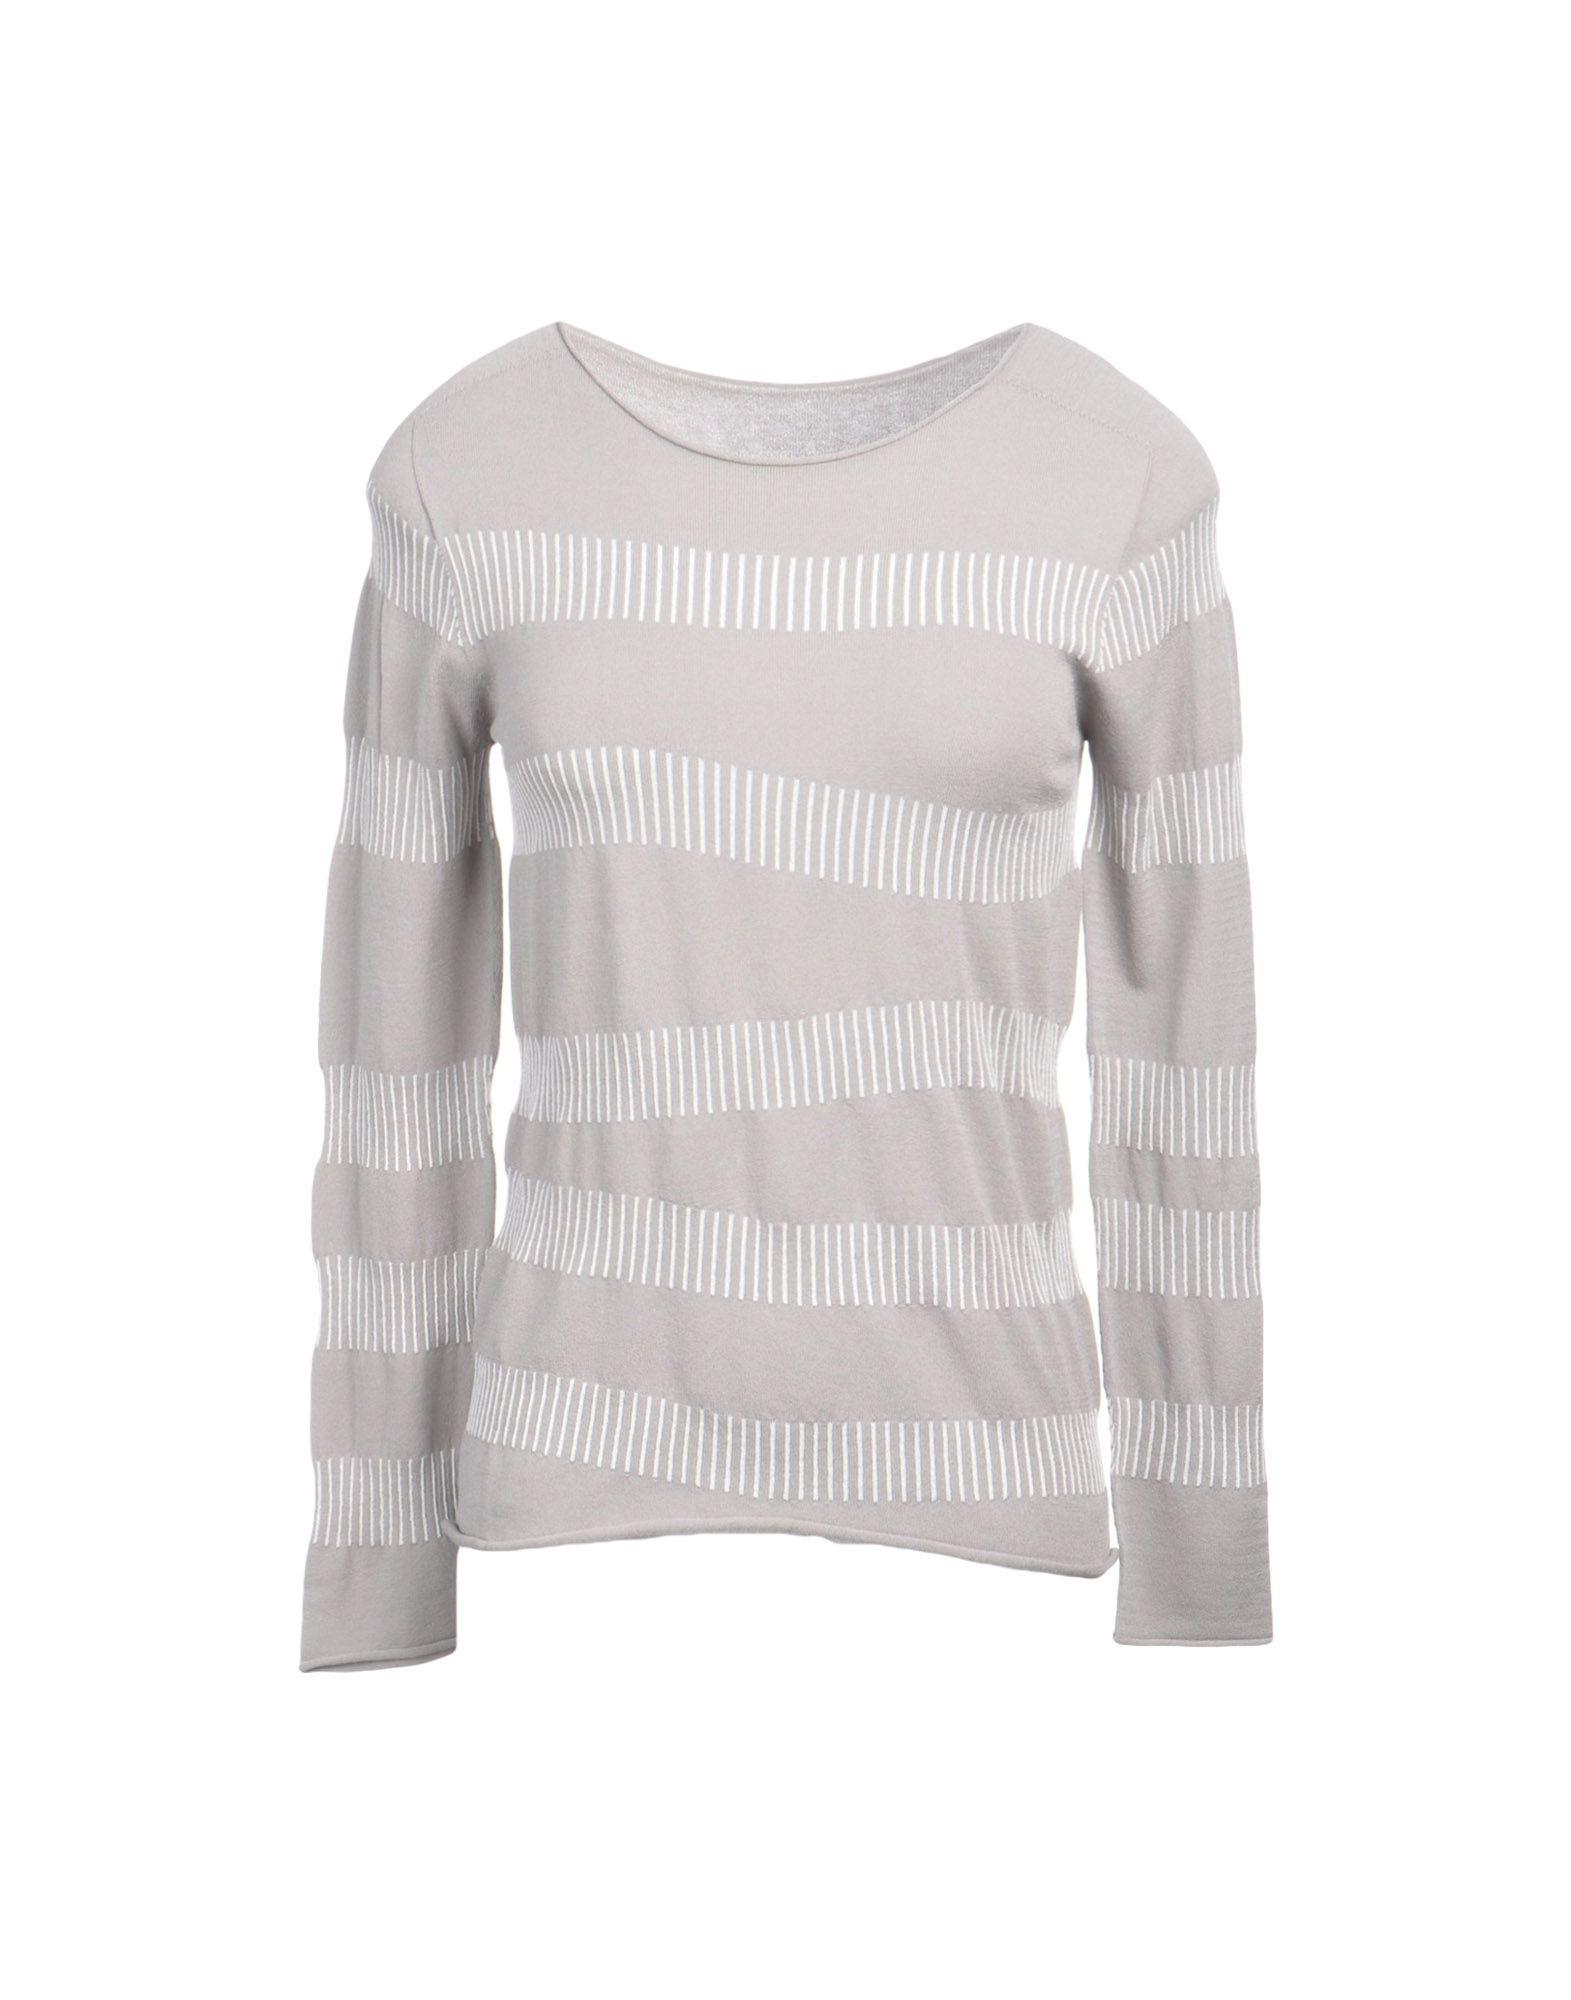 Armani Synthetic Sweater in Gray - Lyst